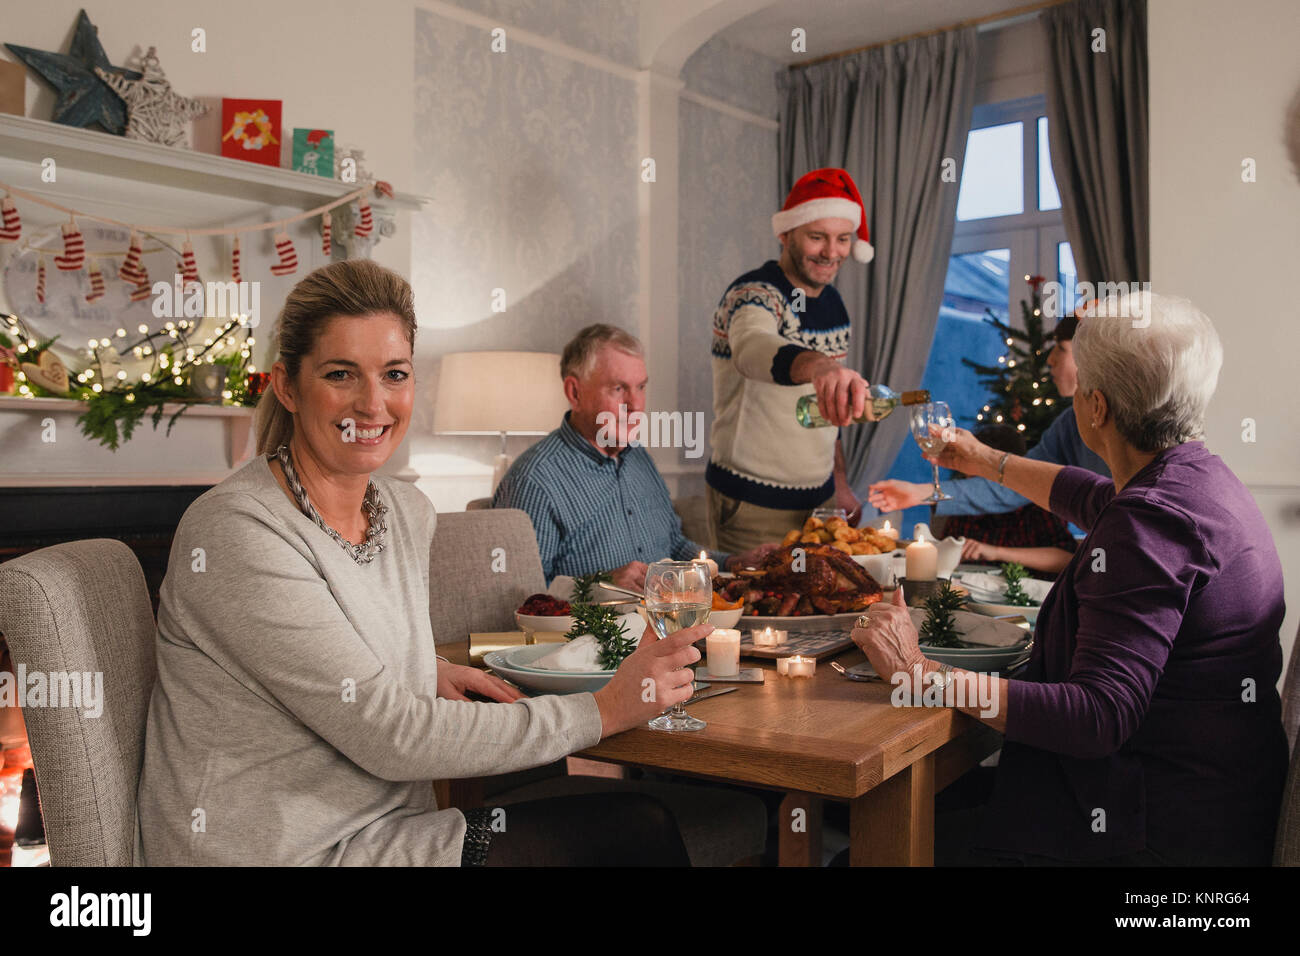 Happy mature woman is smiling for the camera while enjoying a glass of wine at her family christmas dinner. Stock Photo